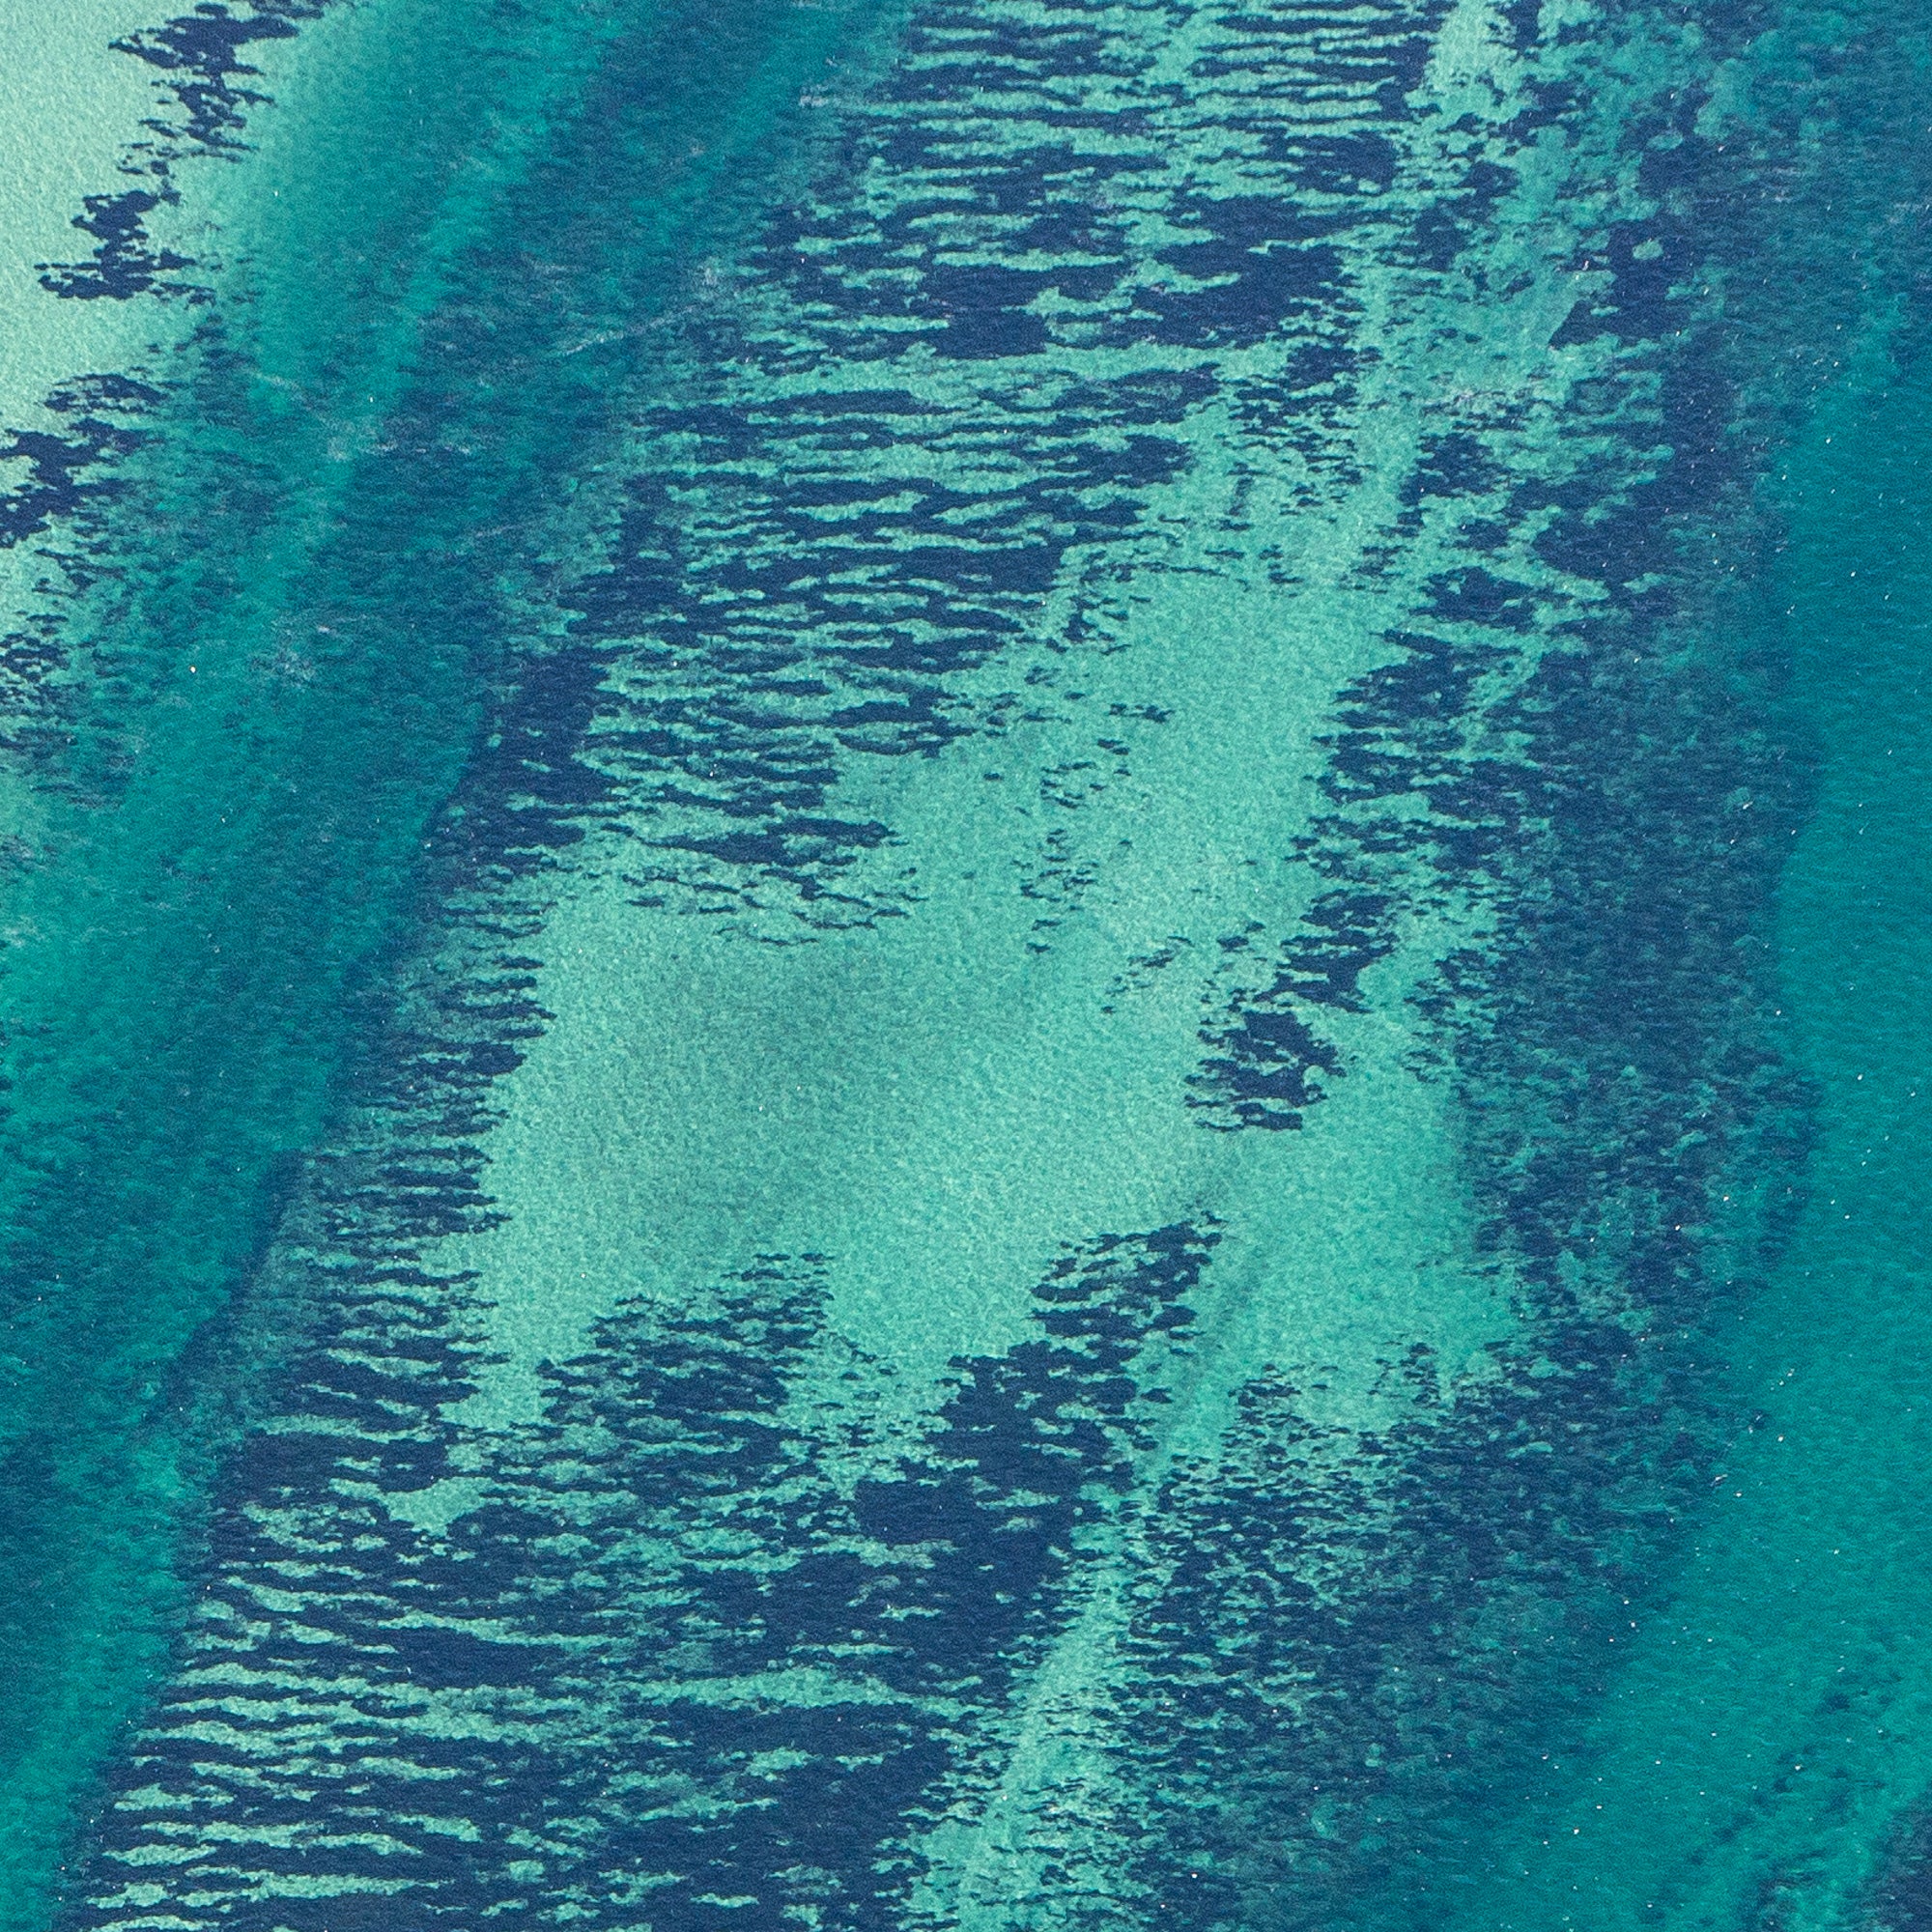 Shark bay, Western Australia, seen from above (detail). Fine art print by photographer Martine Perret.